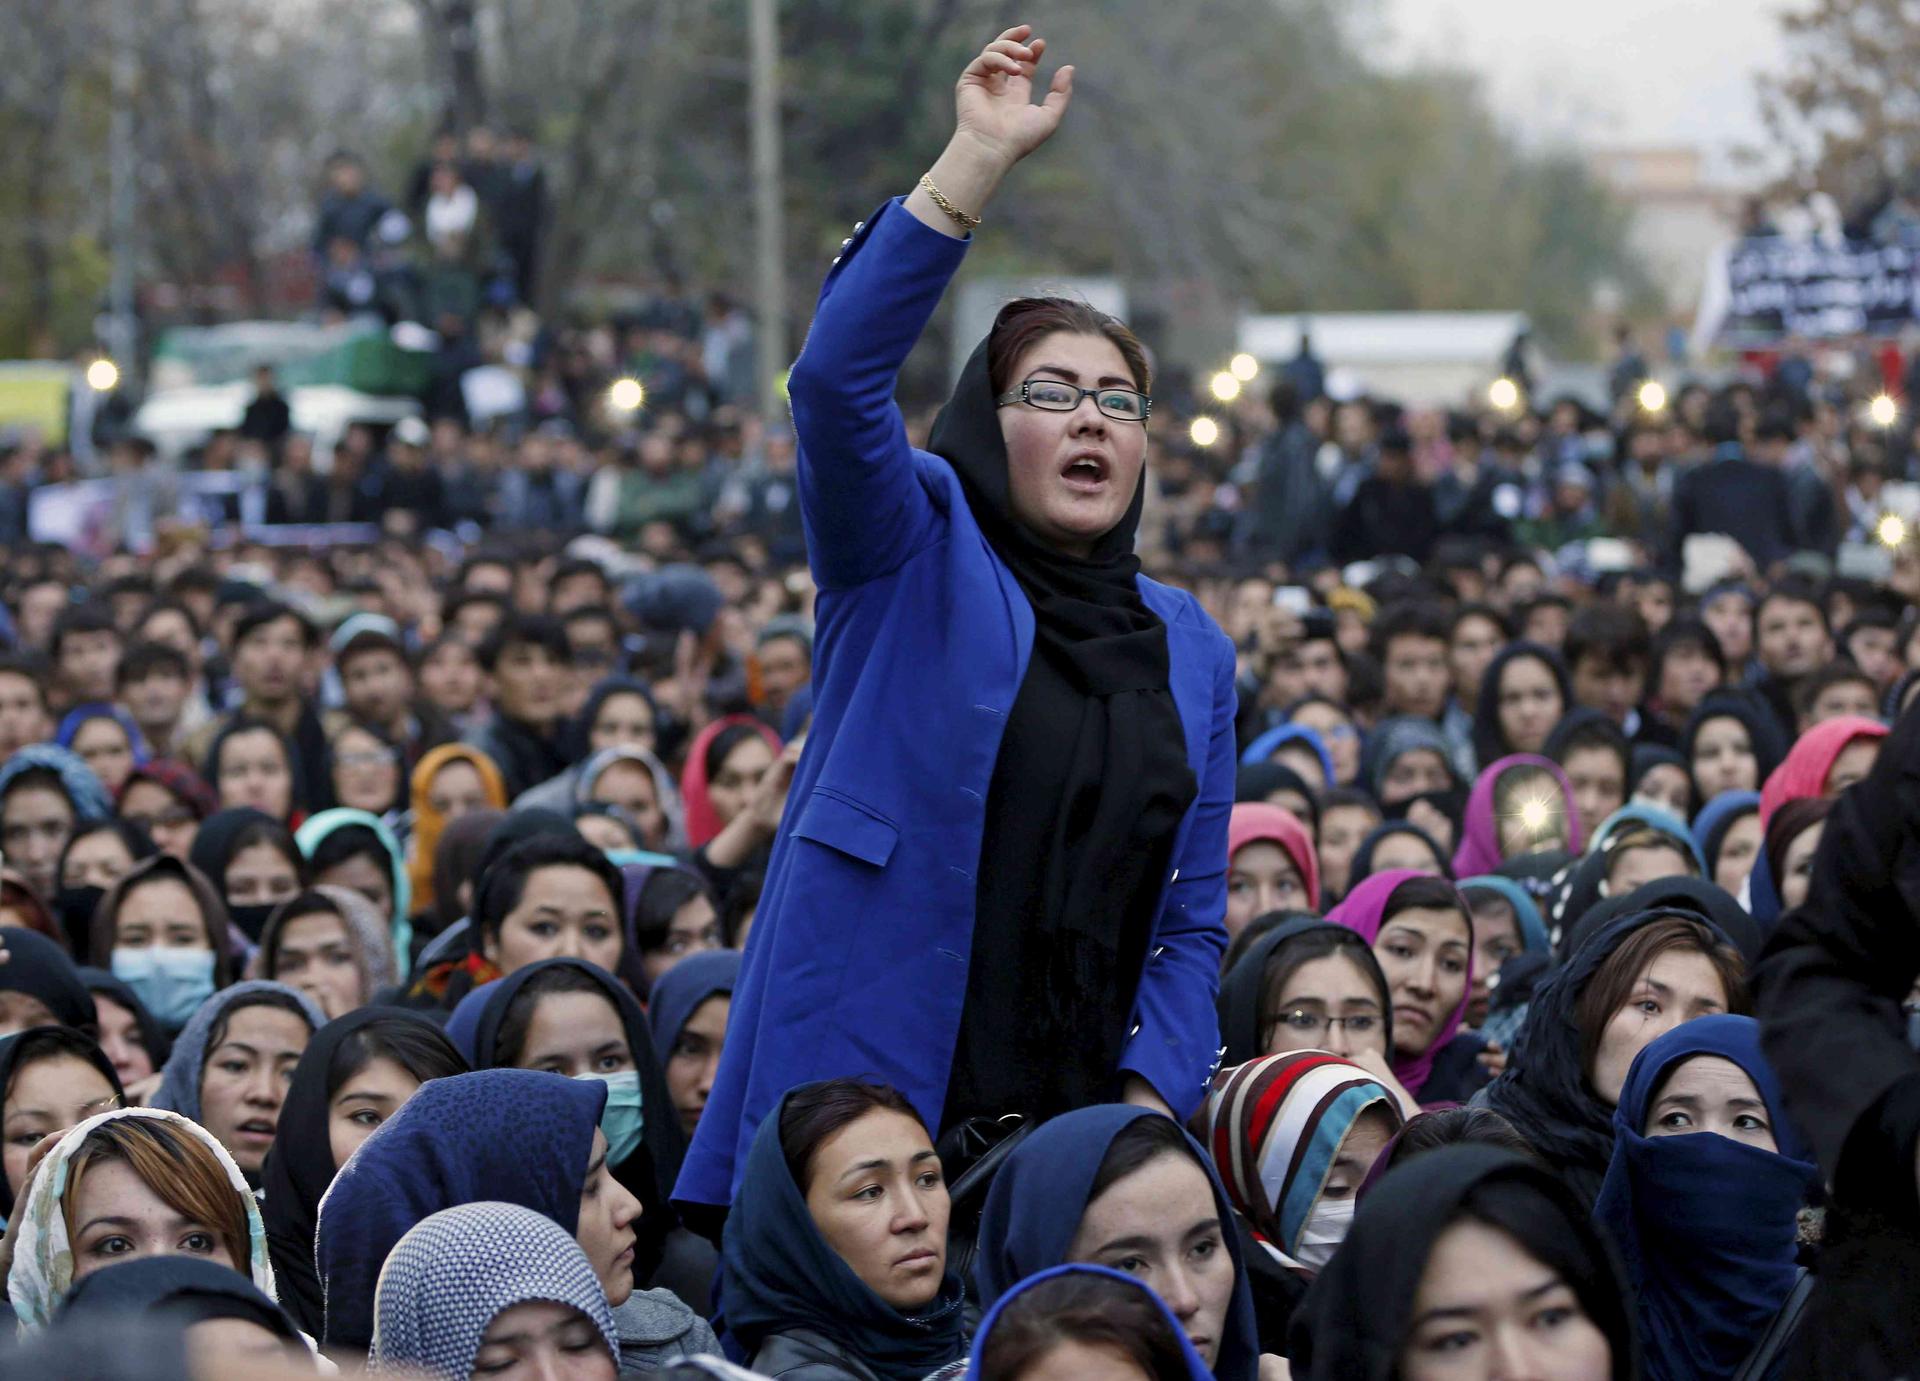 Women chant slogans during a protest in Kabul, Afghanistan